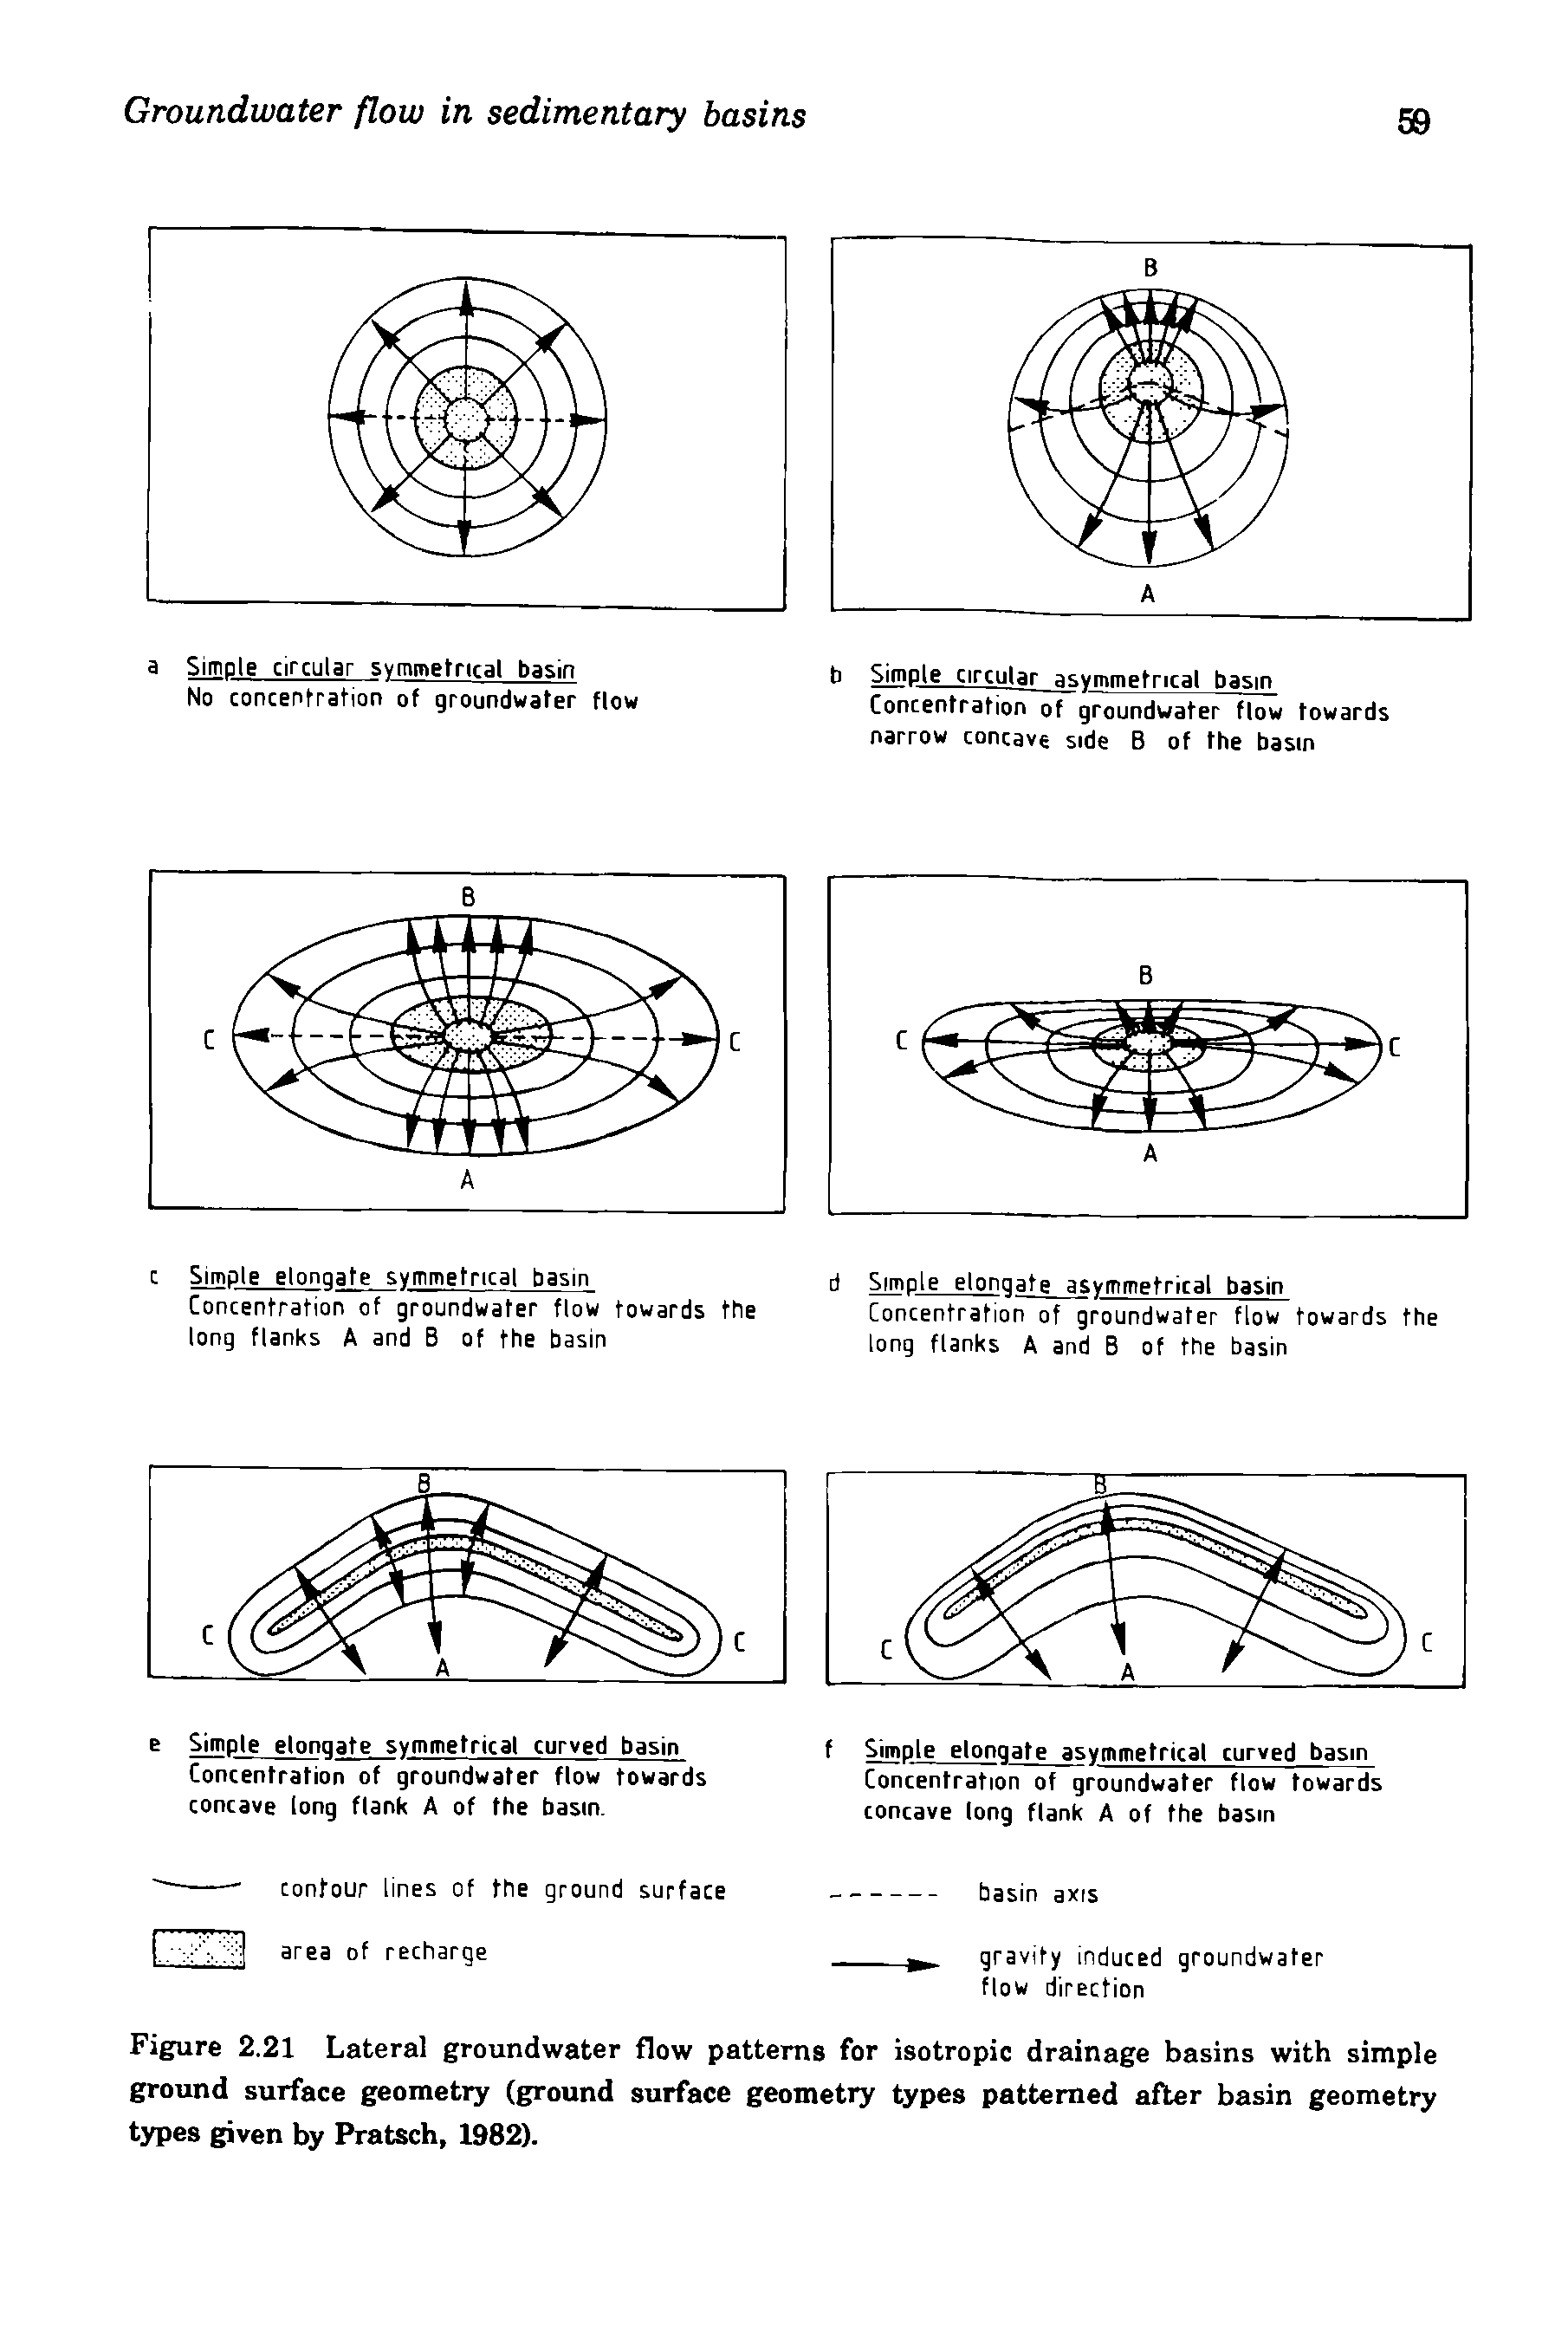 Figure 2.21 Lateral groundwater flow patterns for isotropic drainage basins with simple ground surface geometry (ground surface geometry types patterned after basin geometry types given by Pratsch, 1982).